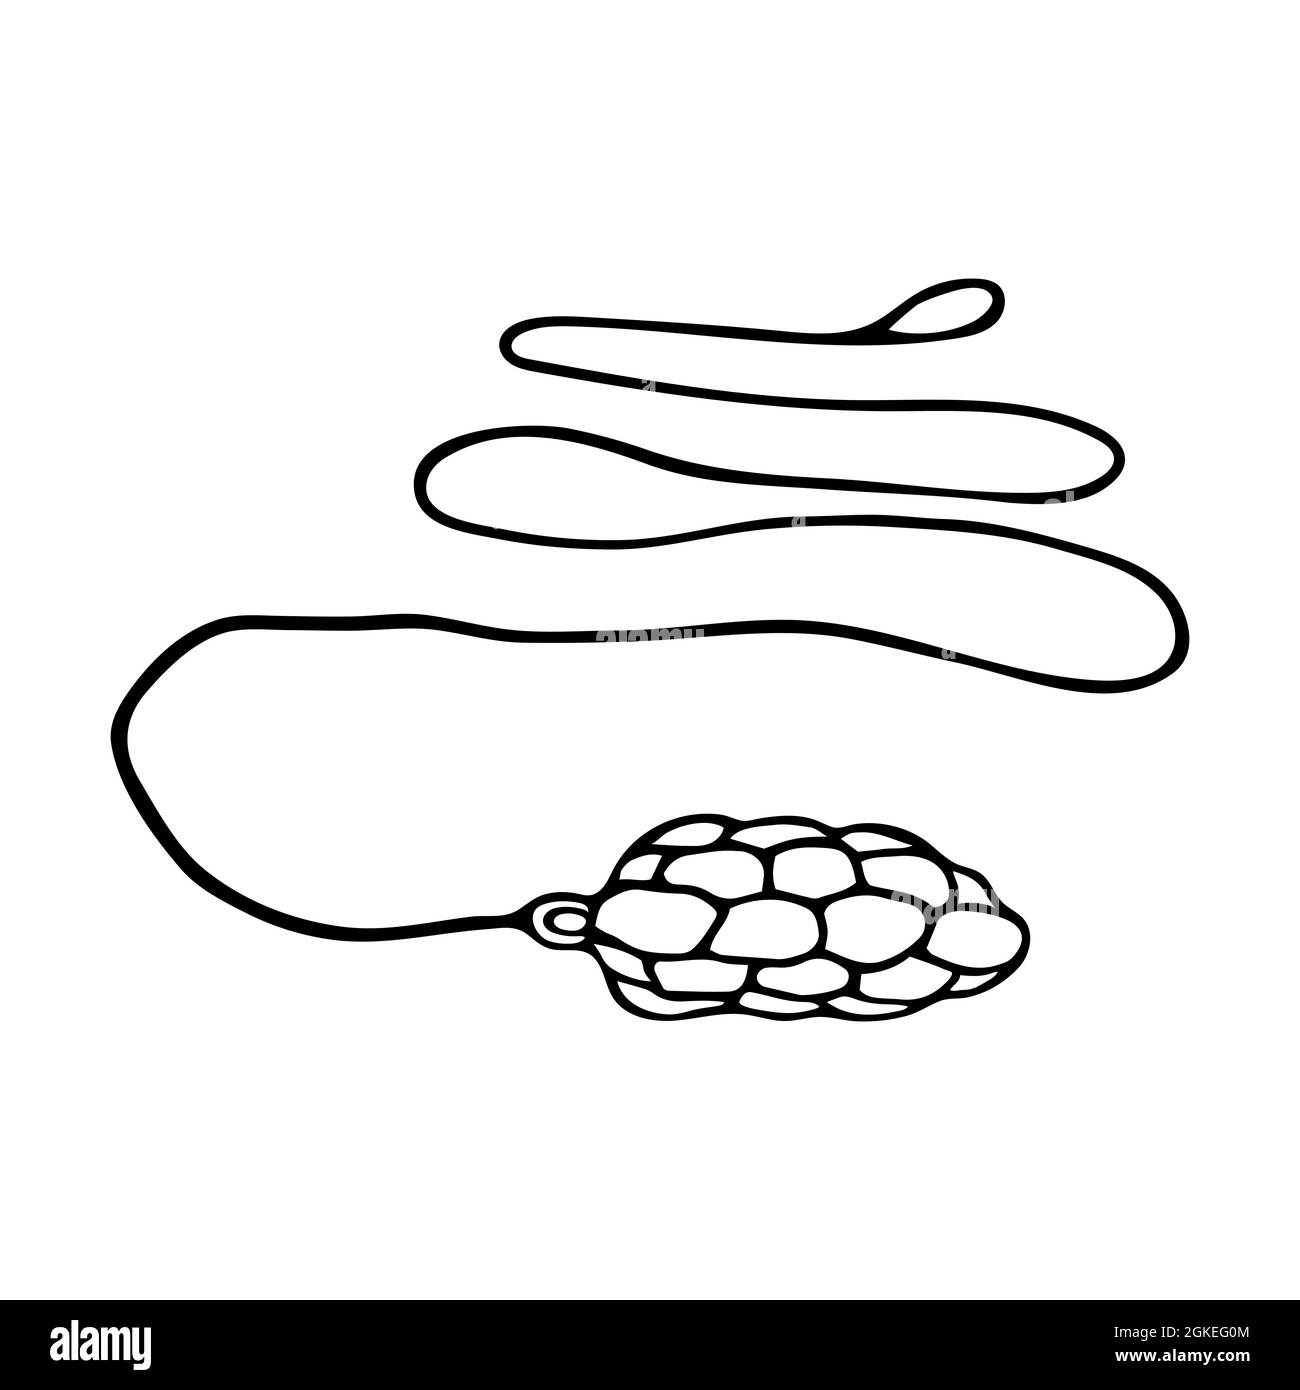 Hand drawn doodle style Rope Dart in vector. Stock Vector